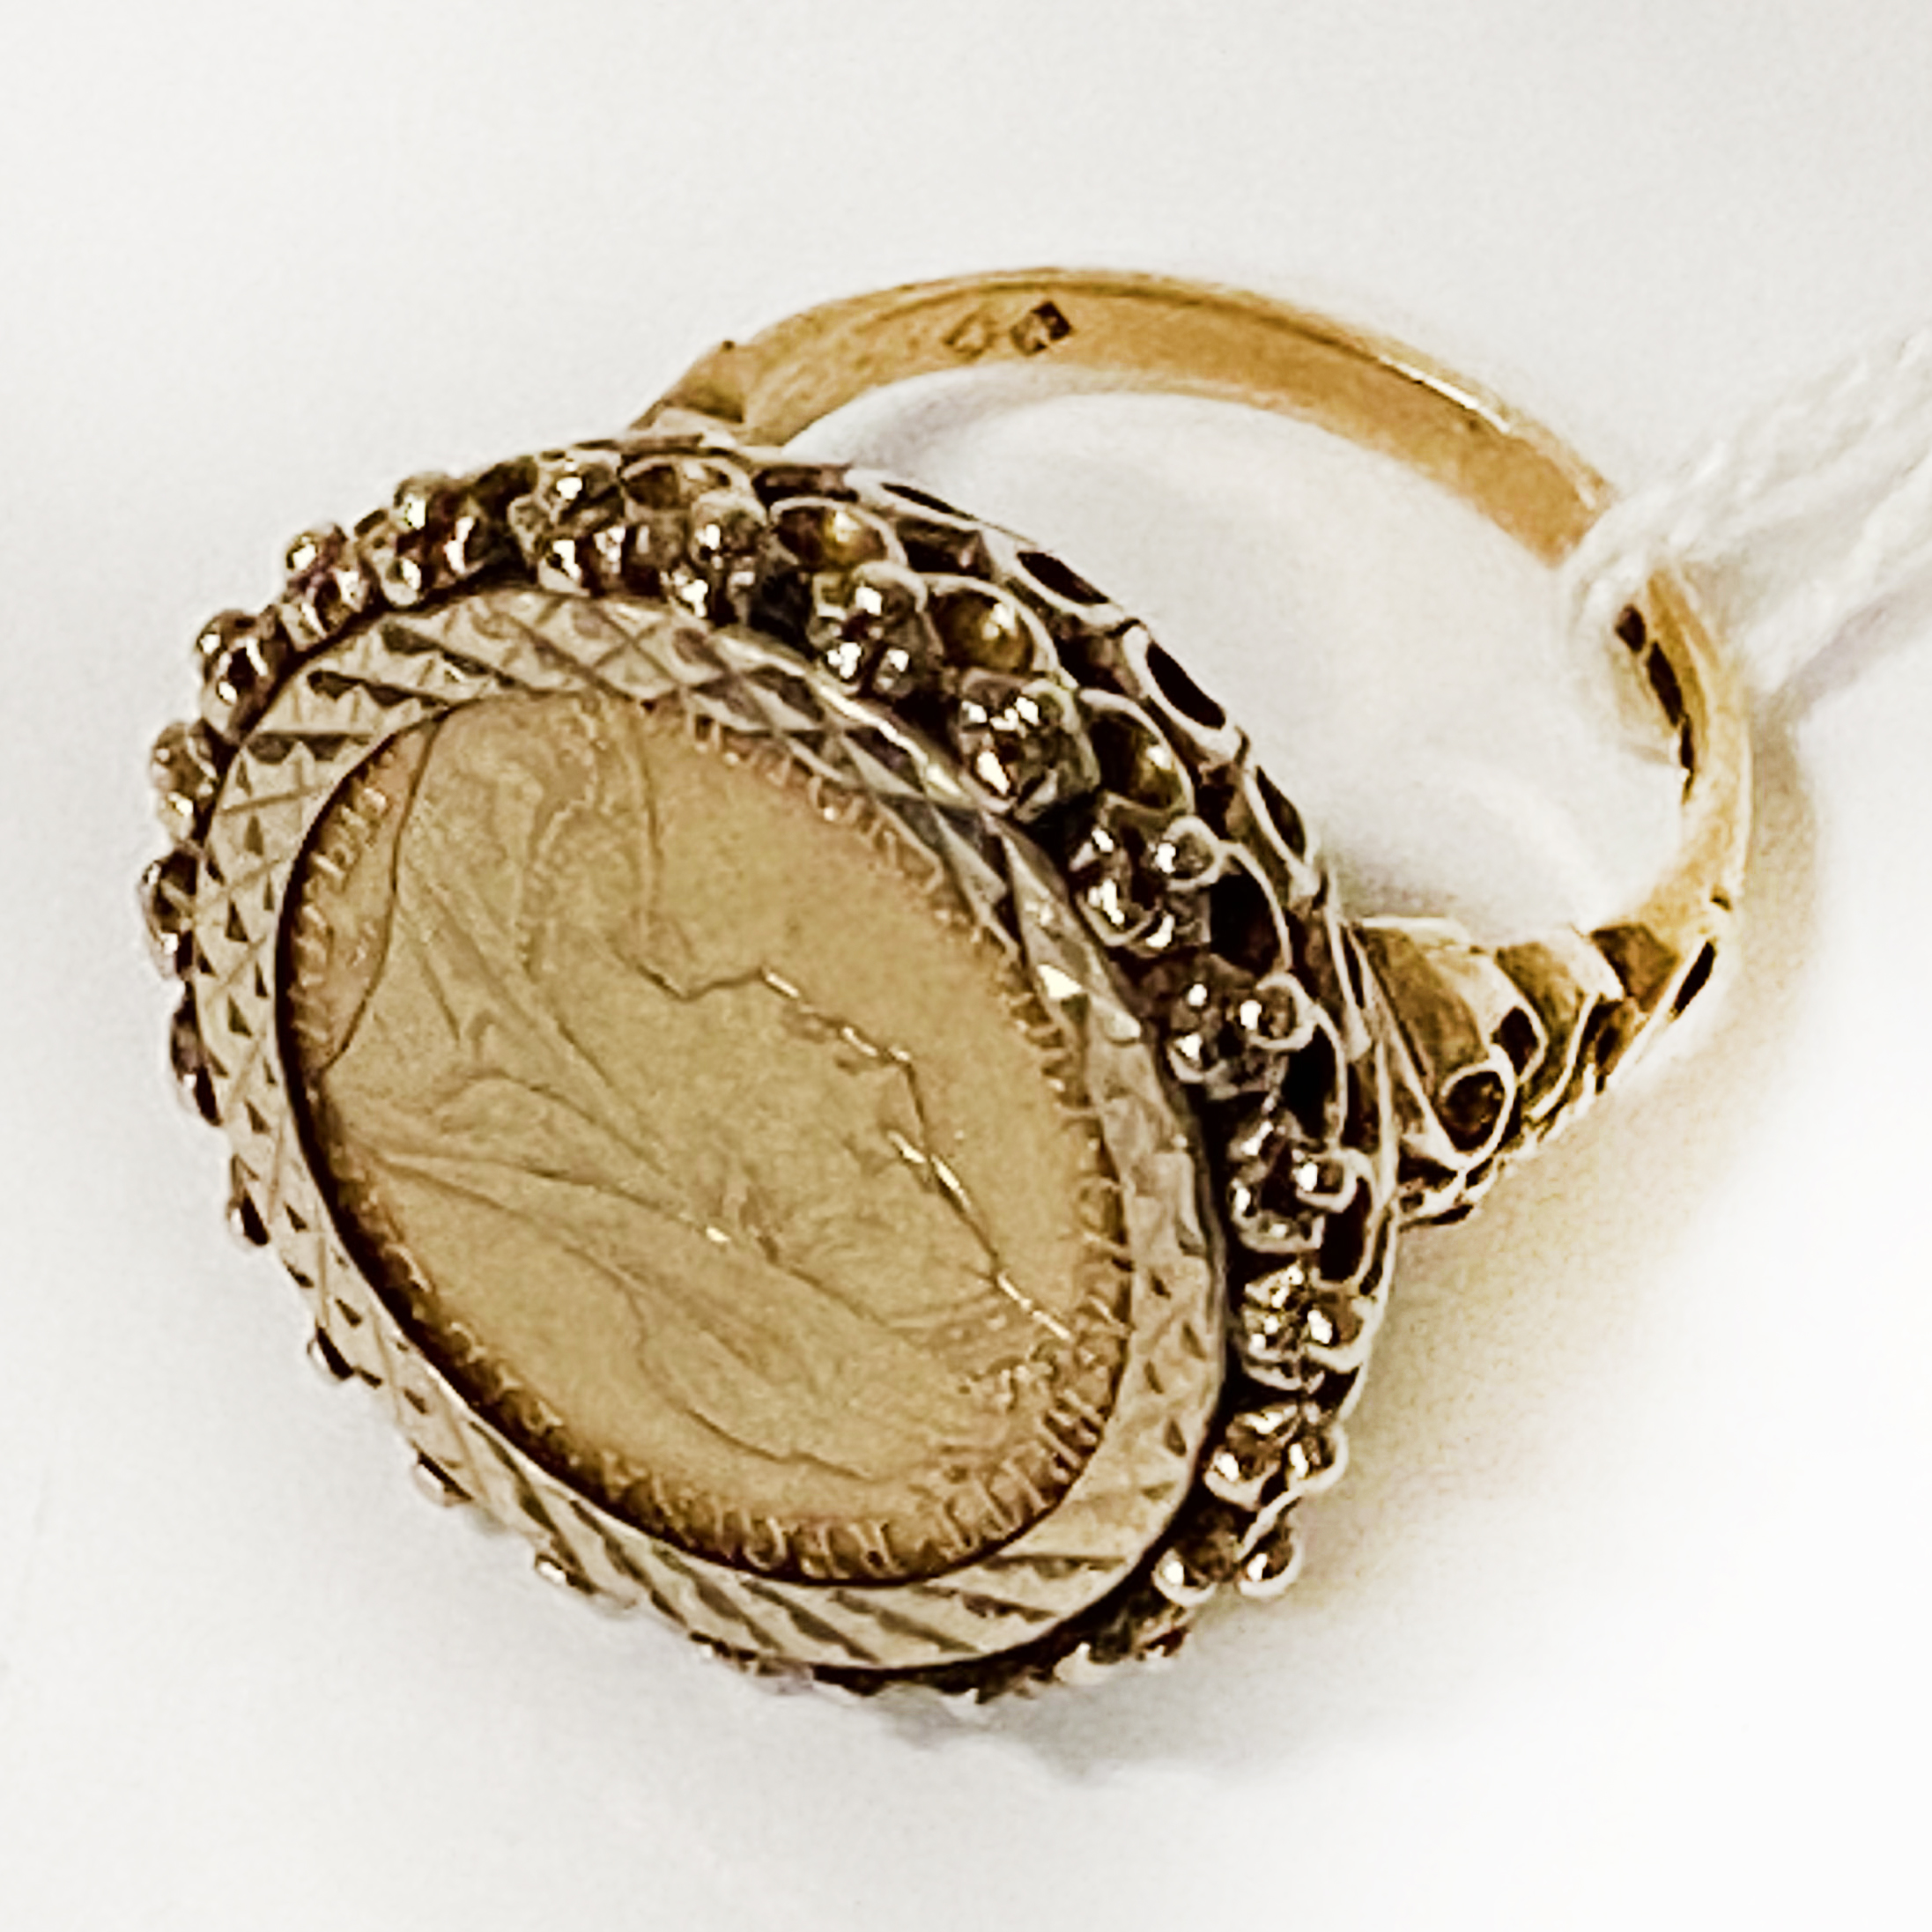 HALF SOVEREIGN GENTS RING - SIZE N - 10.5 GRAMS